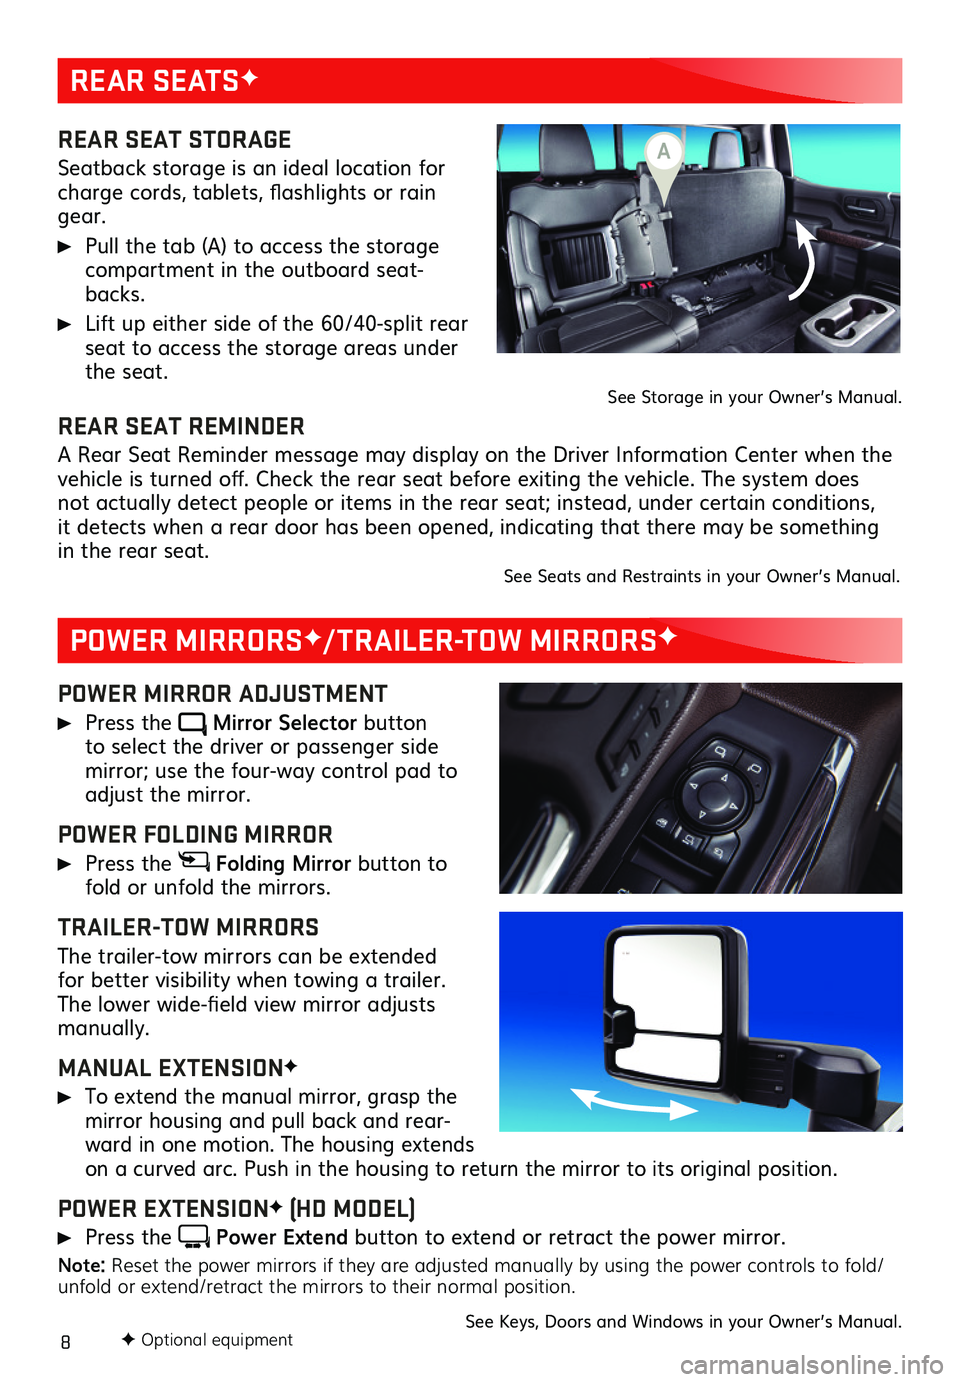 GMC SIERRA 2020  Get To Know Guide 8
REAR SEATSF
POWER MIRRORSF/TRAILER-TOW MIRRORSF
REAR SEAT STORAGE 
Seatback storage is an ideal location for charge cords, tablets, flashlights or rain gear.
 Pull the tab (A) to access the storage 